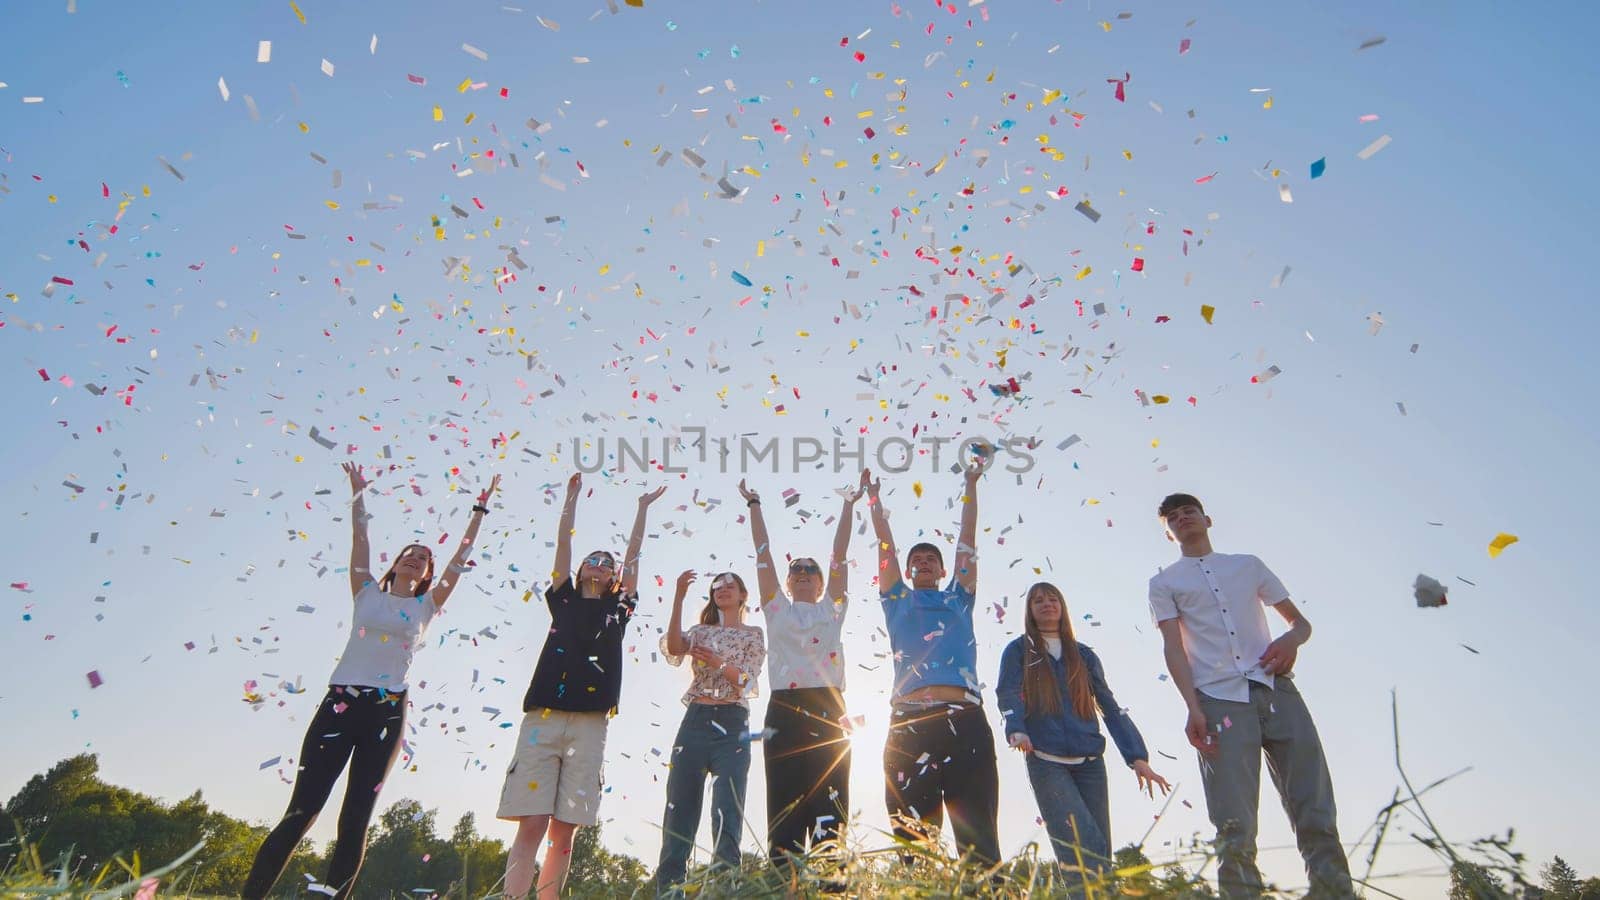 Friends toss colorful paper confetti from their hands against the rays of the evening sun. by DovidPro